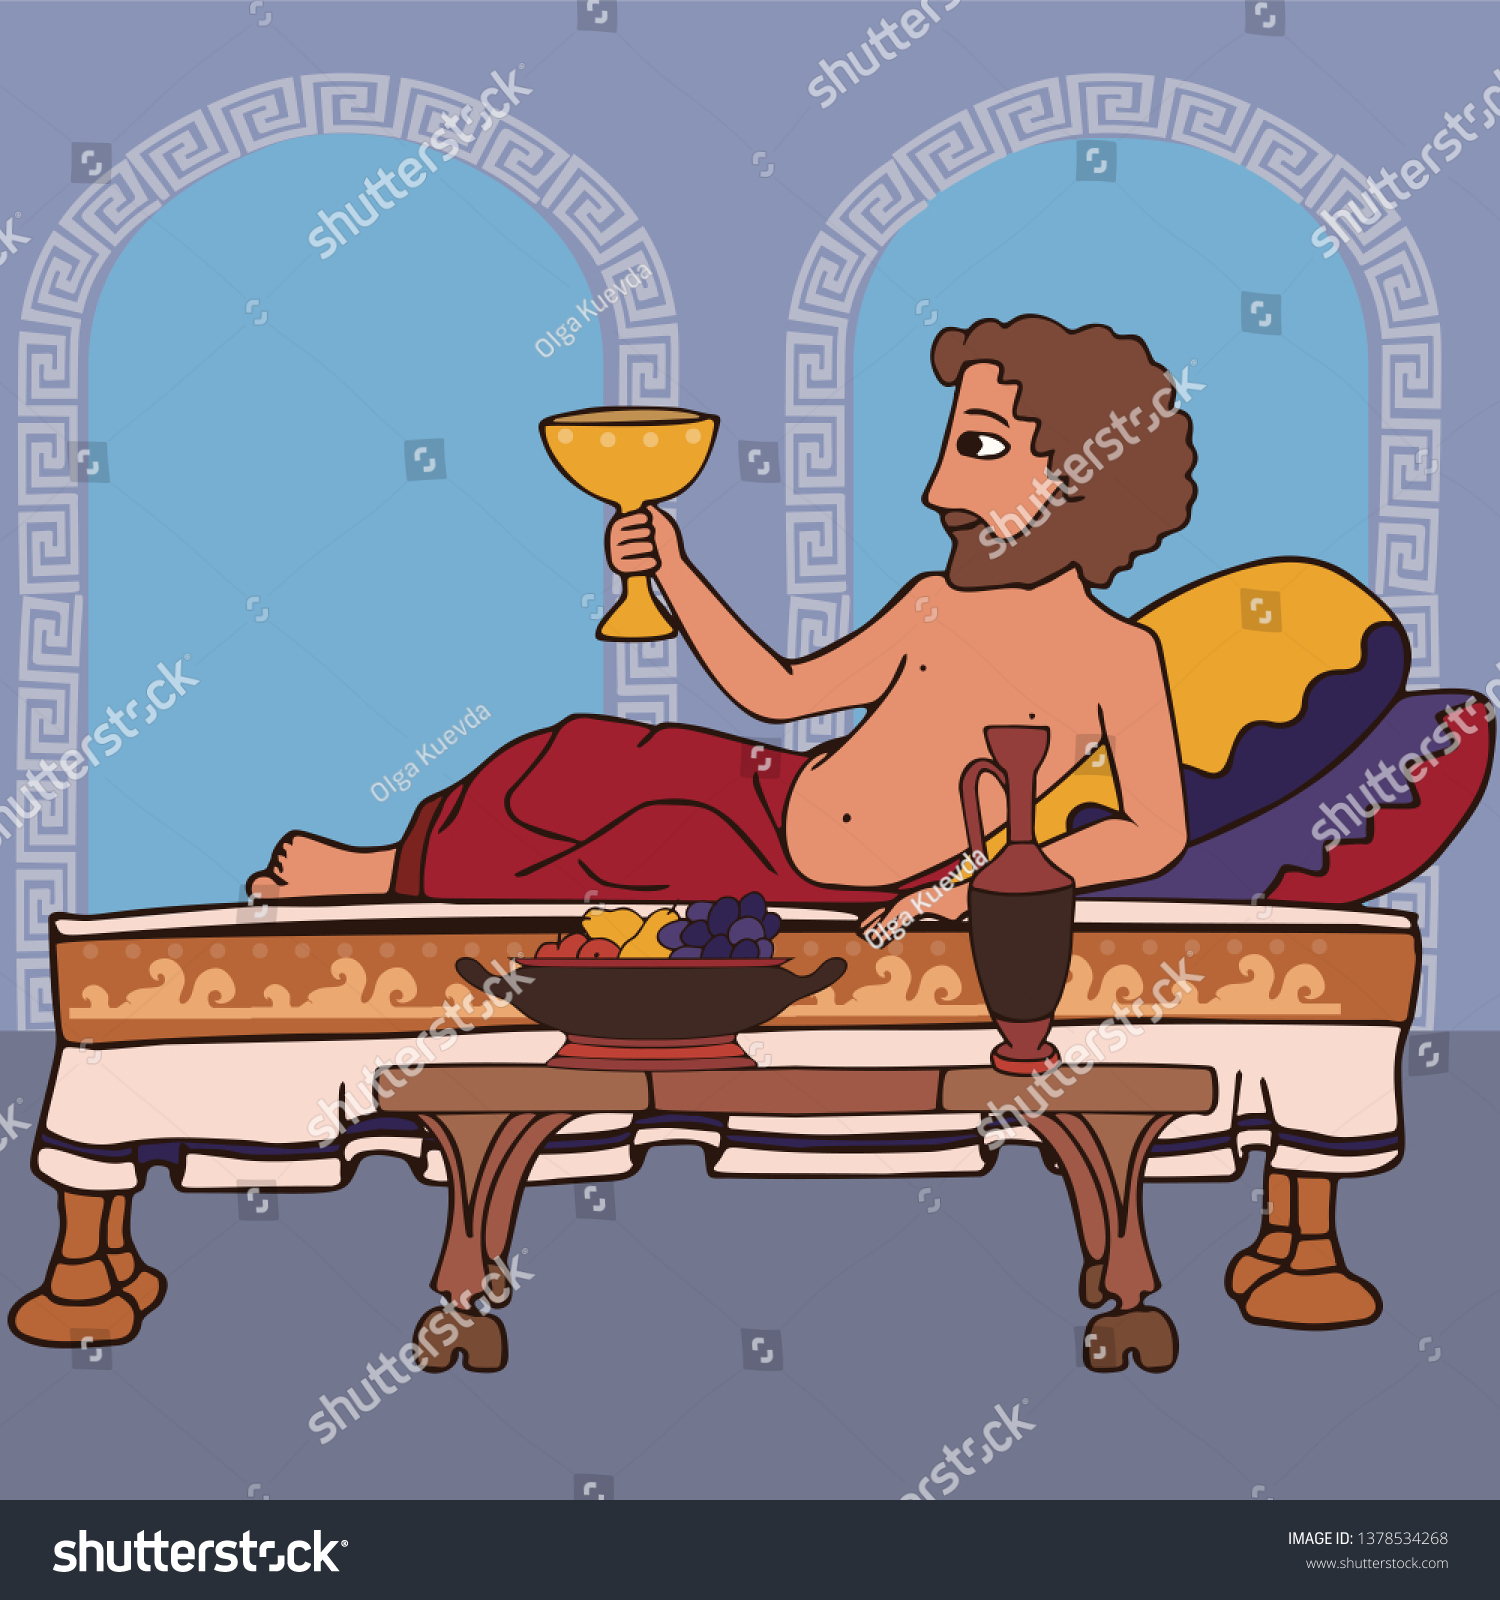 SVG of man reclines on the bed drinking wine, funny vector cartoon illustration of ancient Greek hedonist and everyday life scene svg